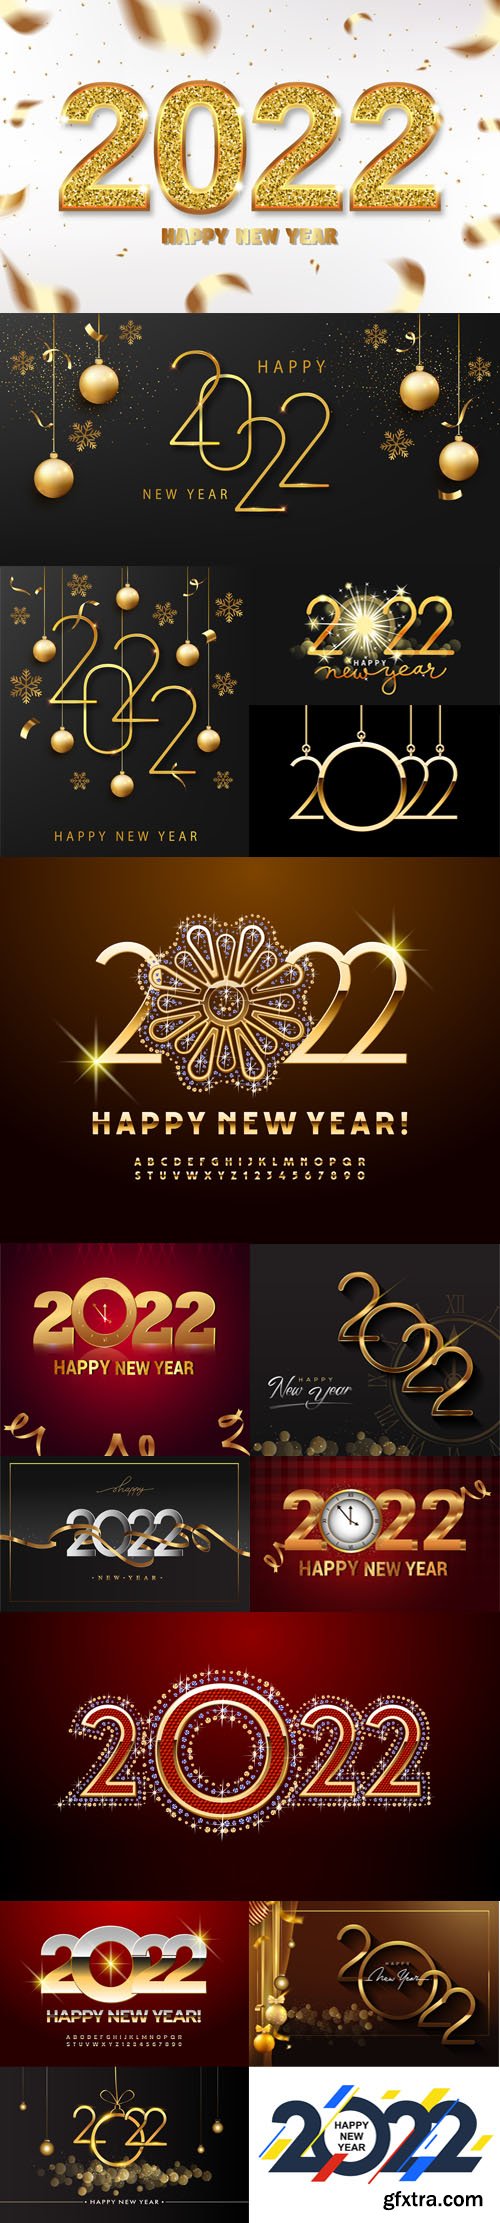 Happy New Year 2022 Backgrounds Collection Vol.5 - 10+ Vector Templates